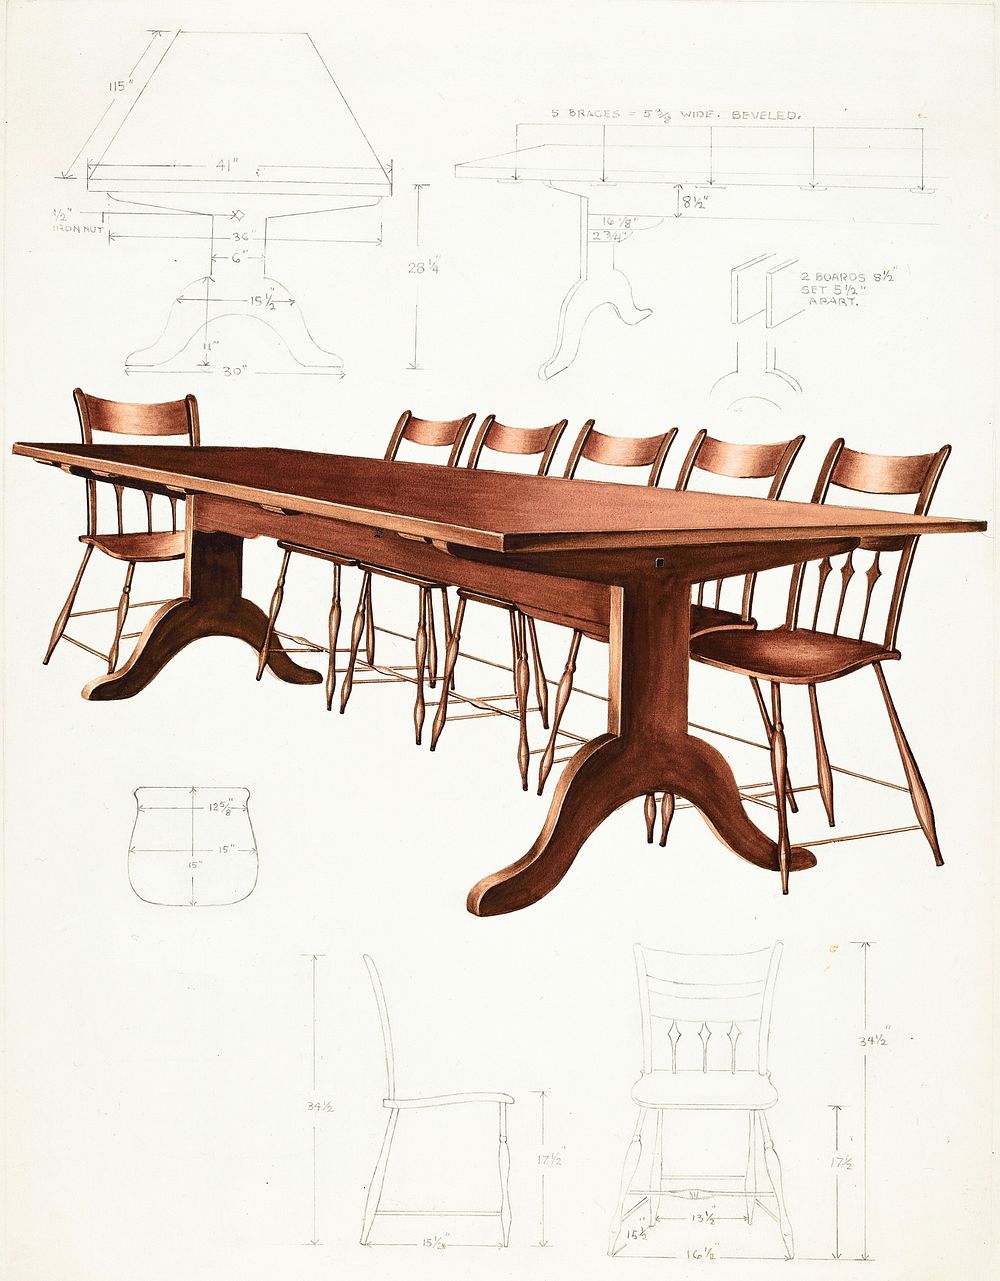 Shaker Dining Table and Chairs (c. 1937) by Lon Cronk. Original from The National Gallery of Art. Digitally enhanced by…